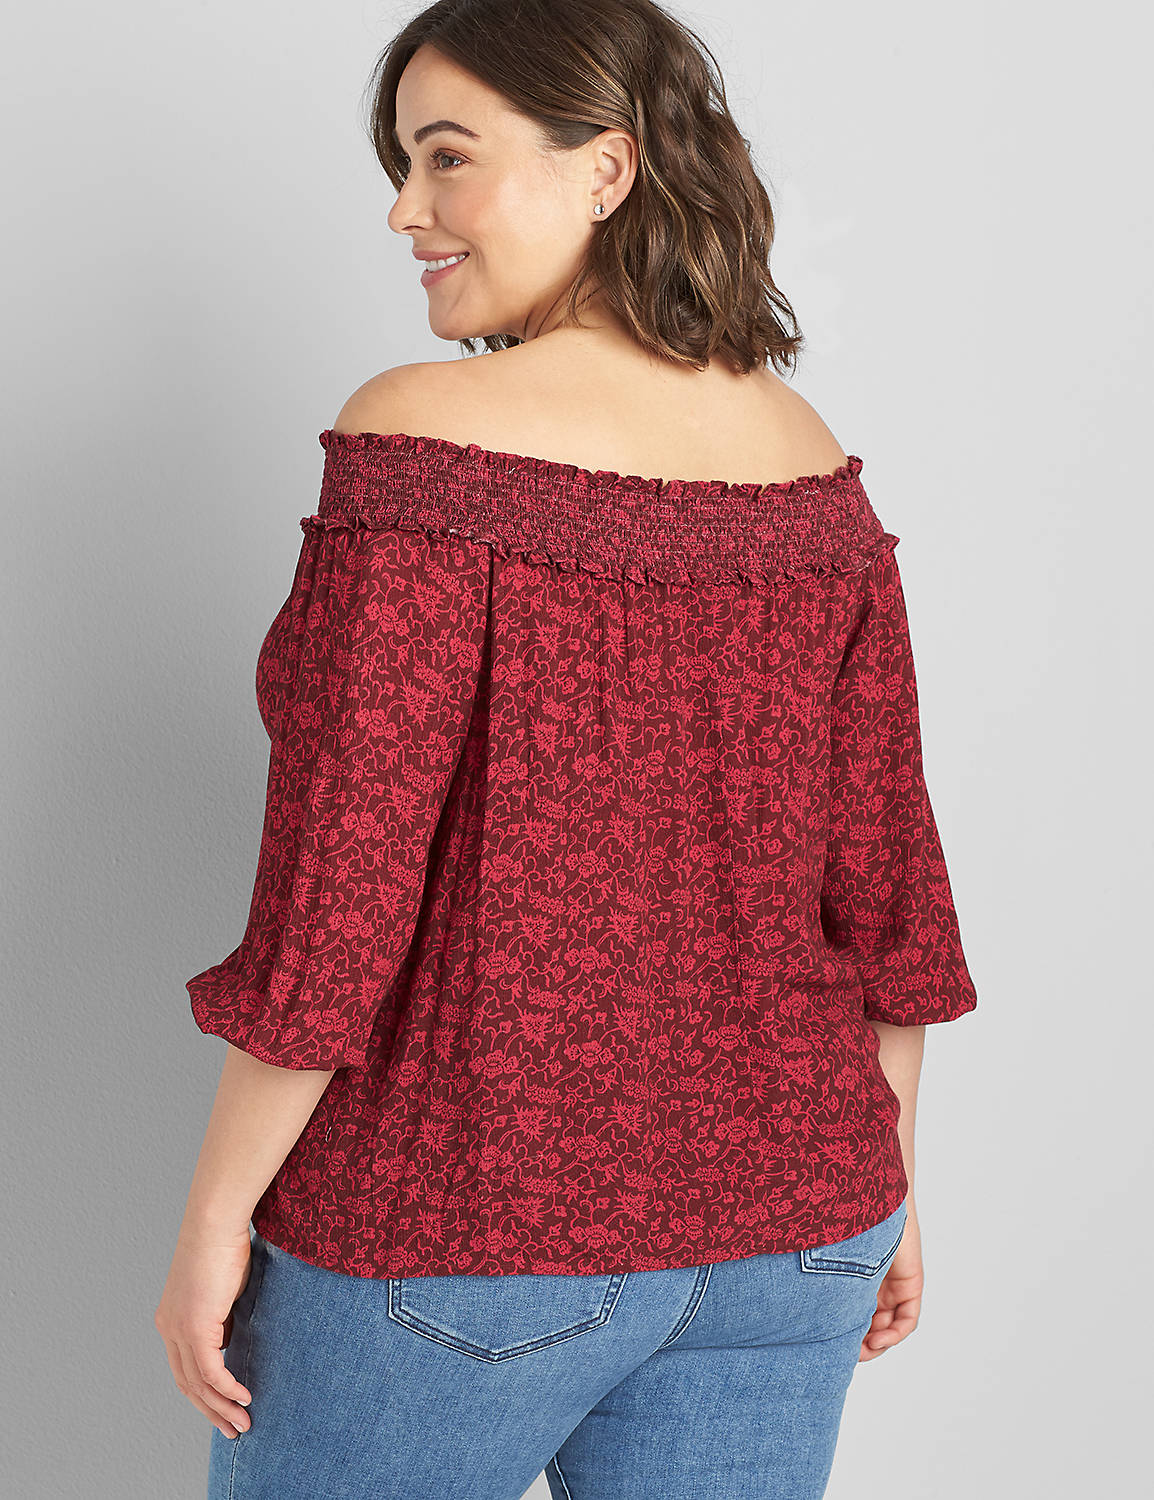 3/4 Sleeve Off-the-Shoulder Top Product Image 2